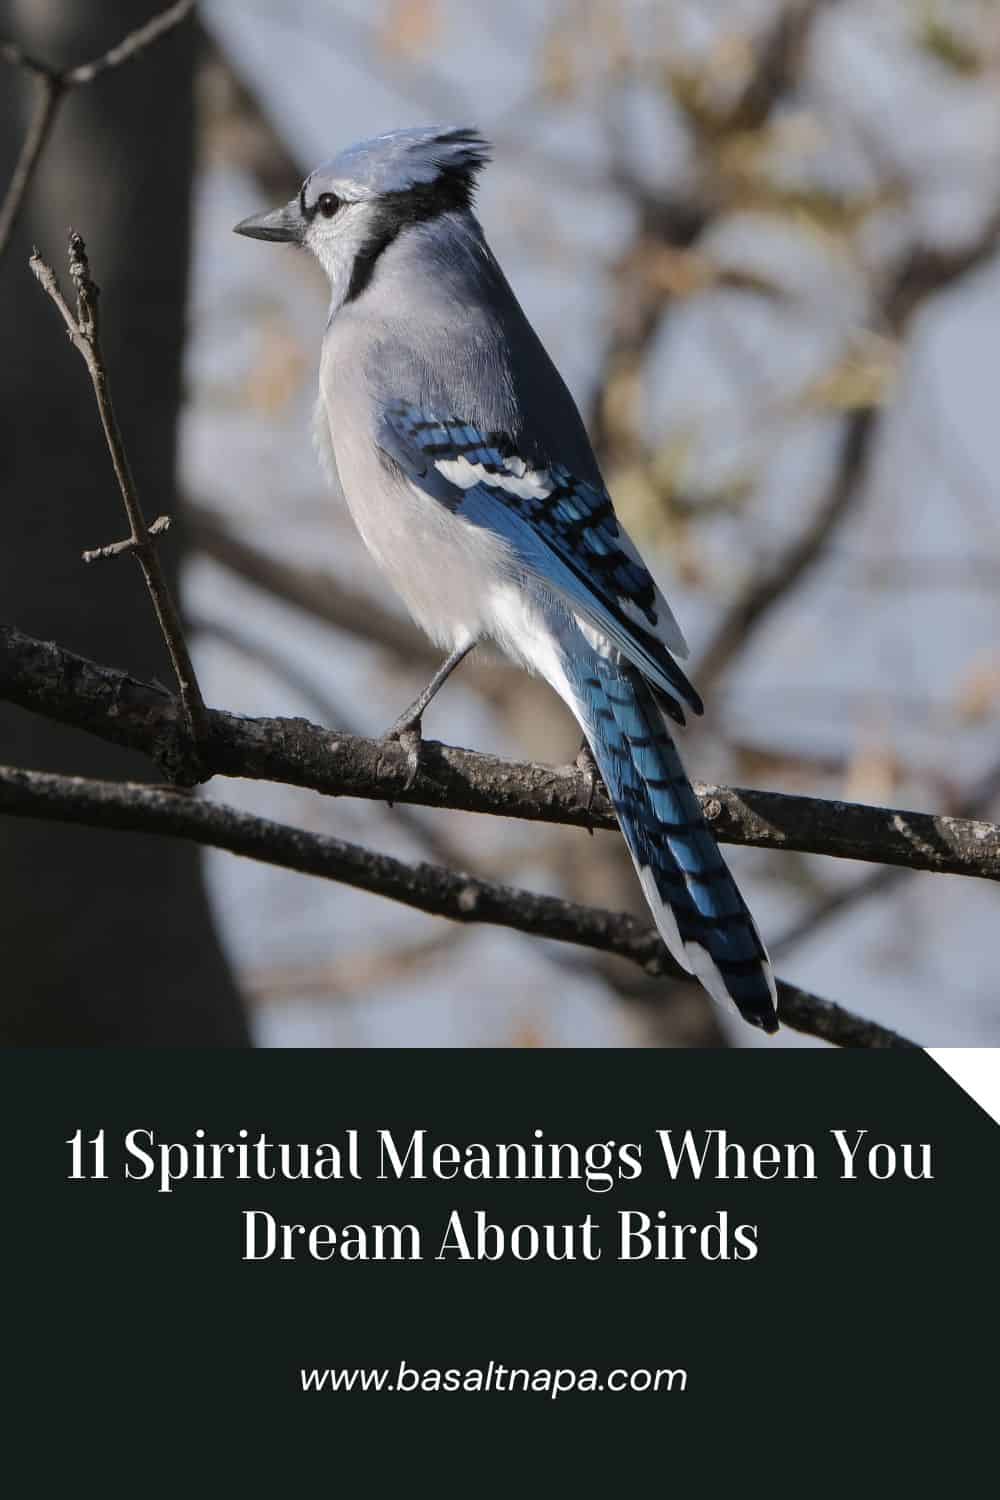 11 Spiritual Meanings When You Dream About Birds